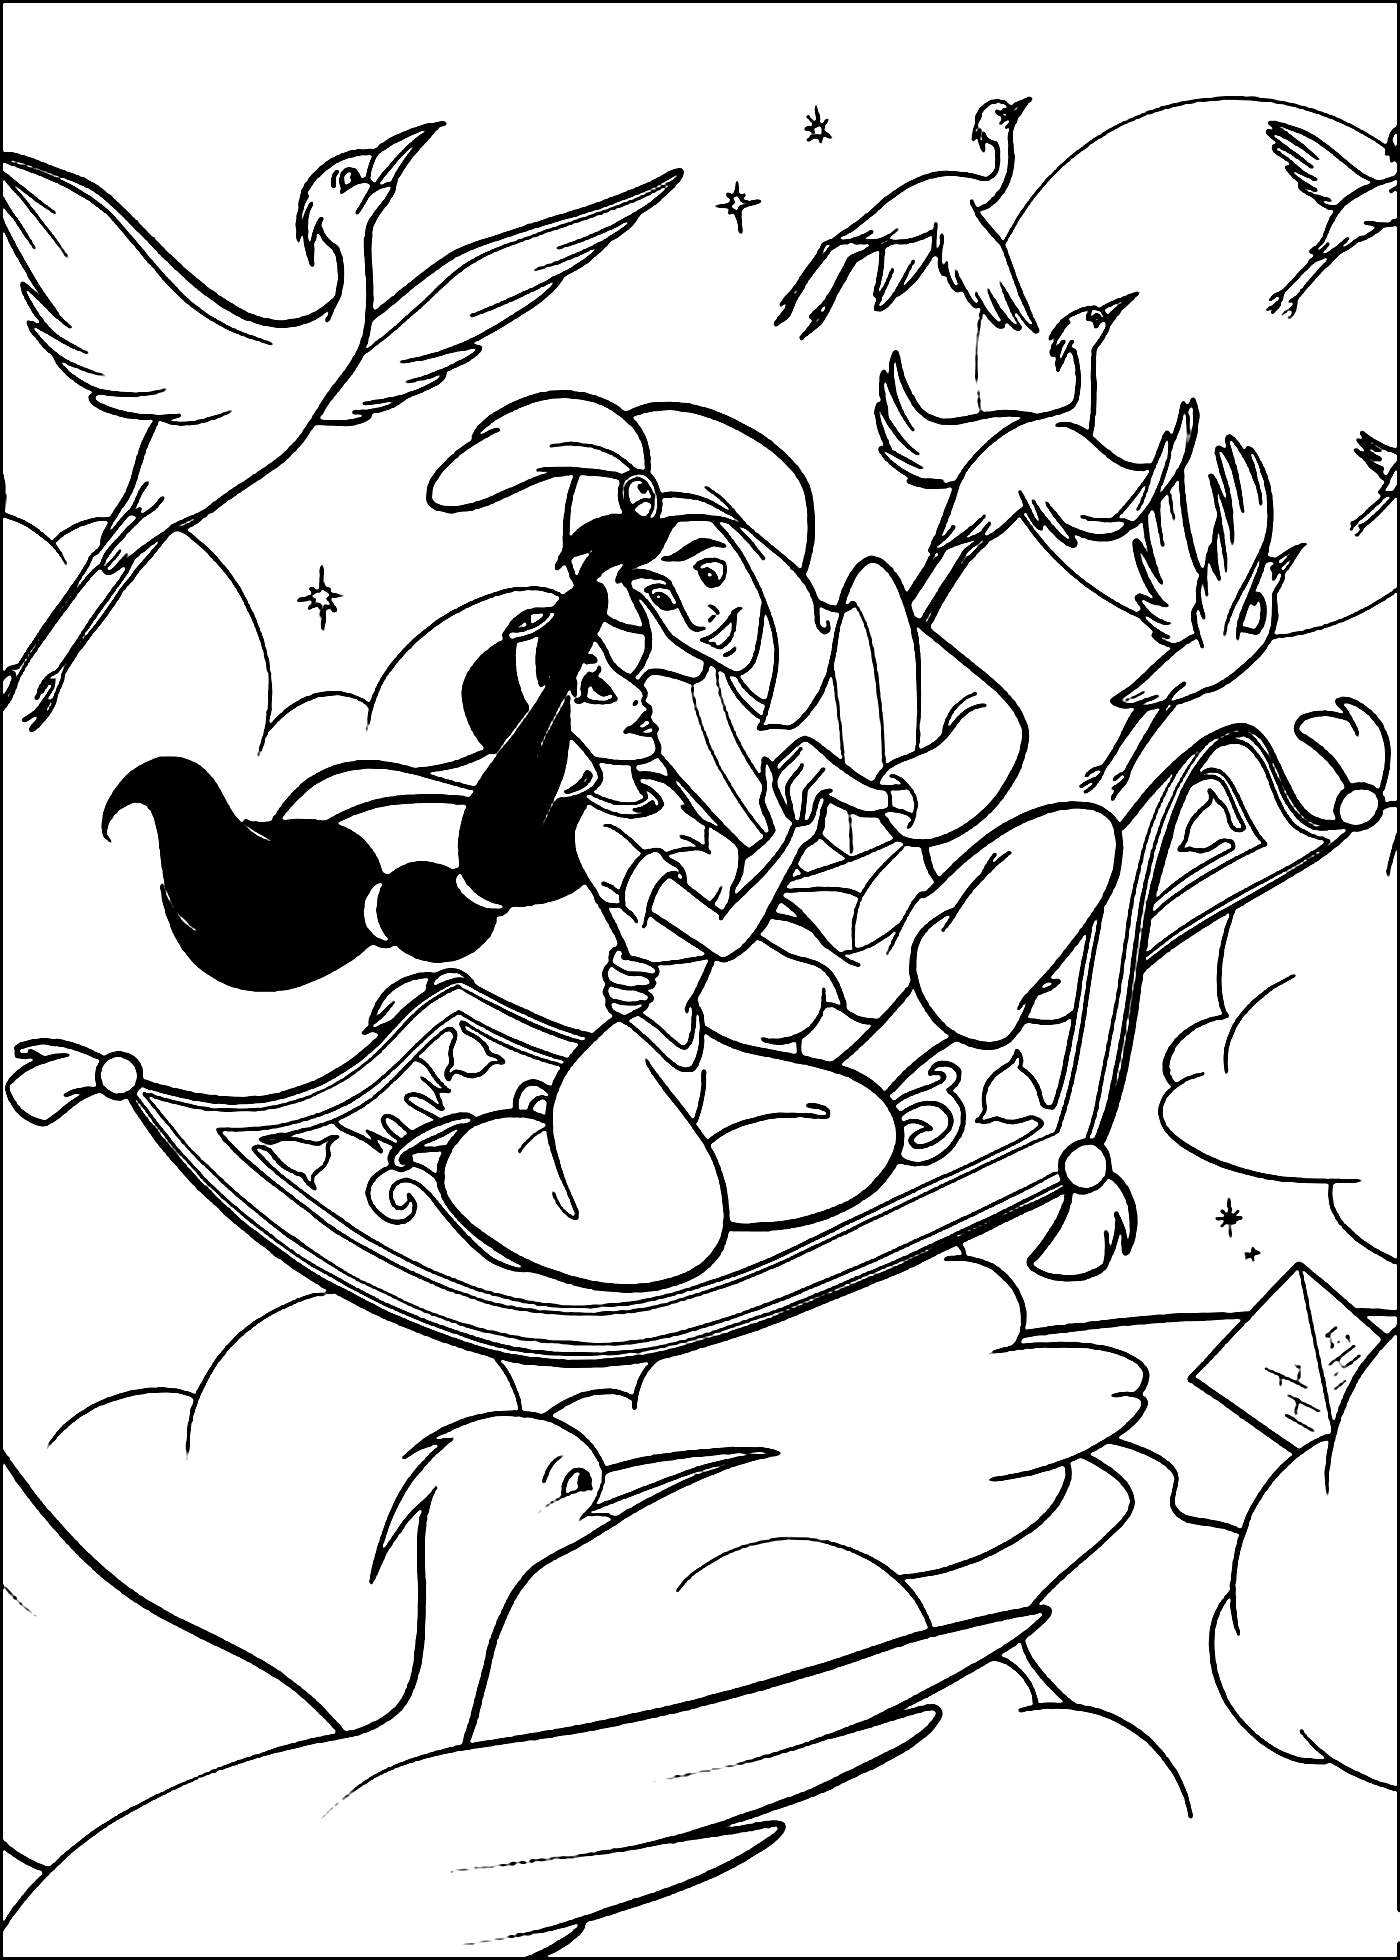 Coloring Page of Aladdin and Jasmine Over the Clouds with Flying Carpet